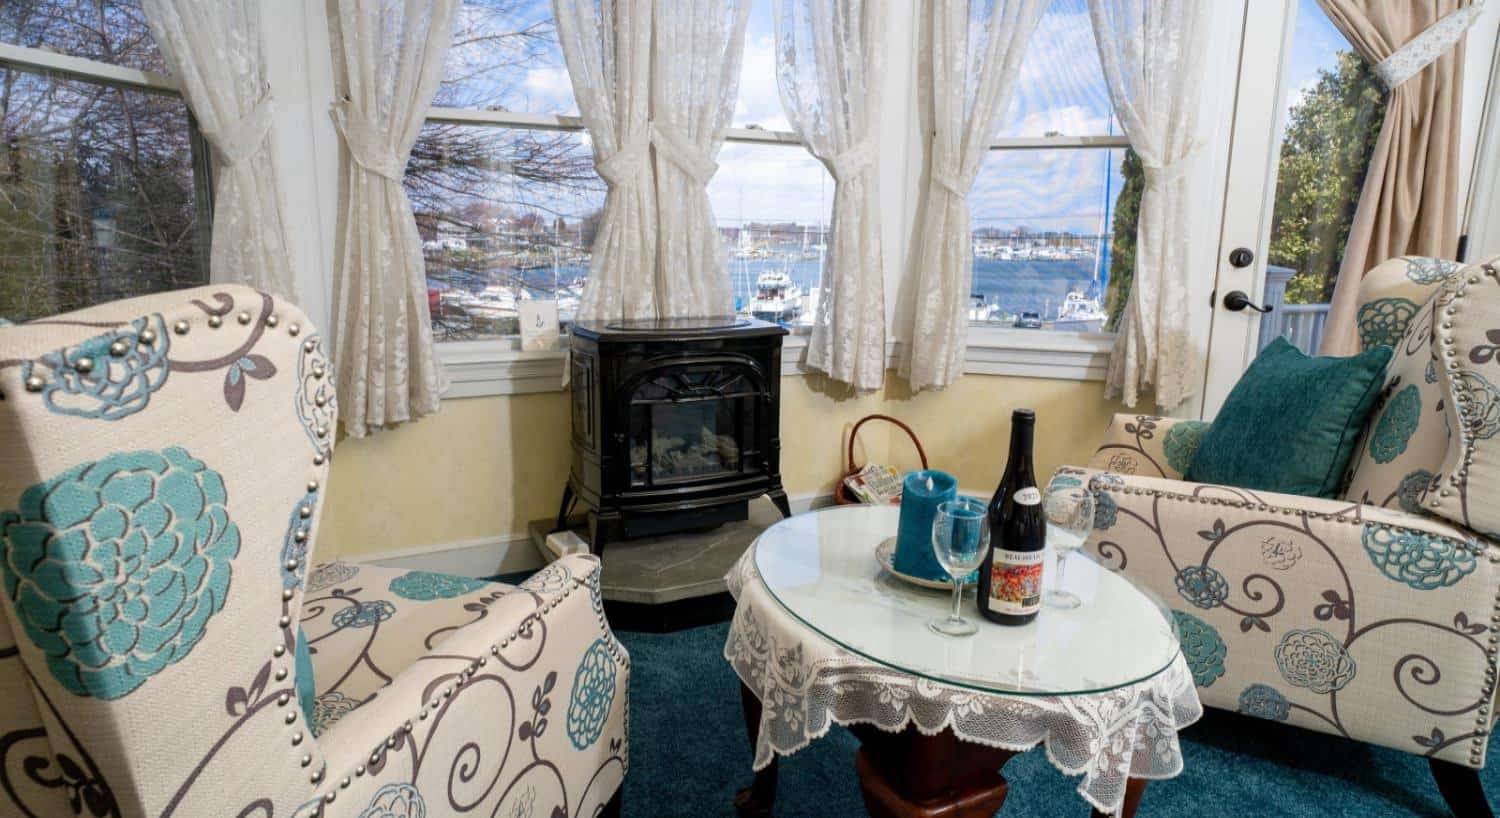 Two upholstered arm chairs with a bold teal and brown flower pattern sitting next to a small table with glass top near a fireplace next to large windows with a view of the marina